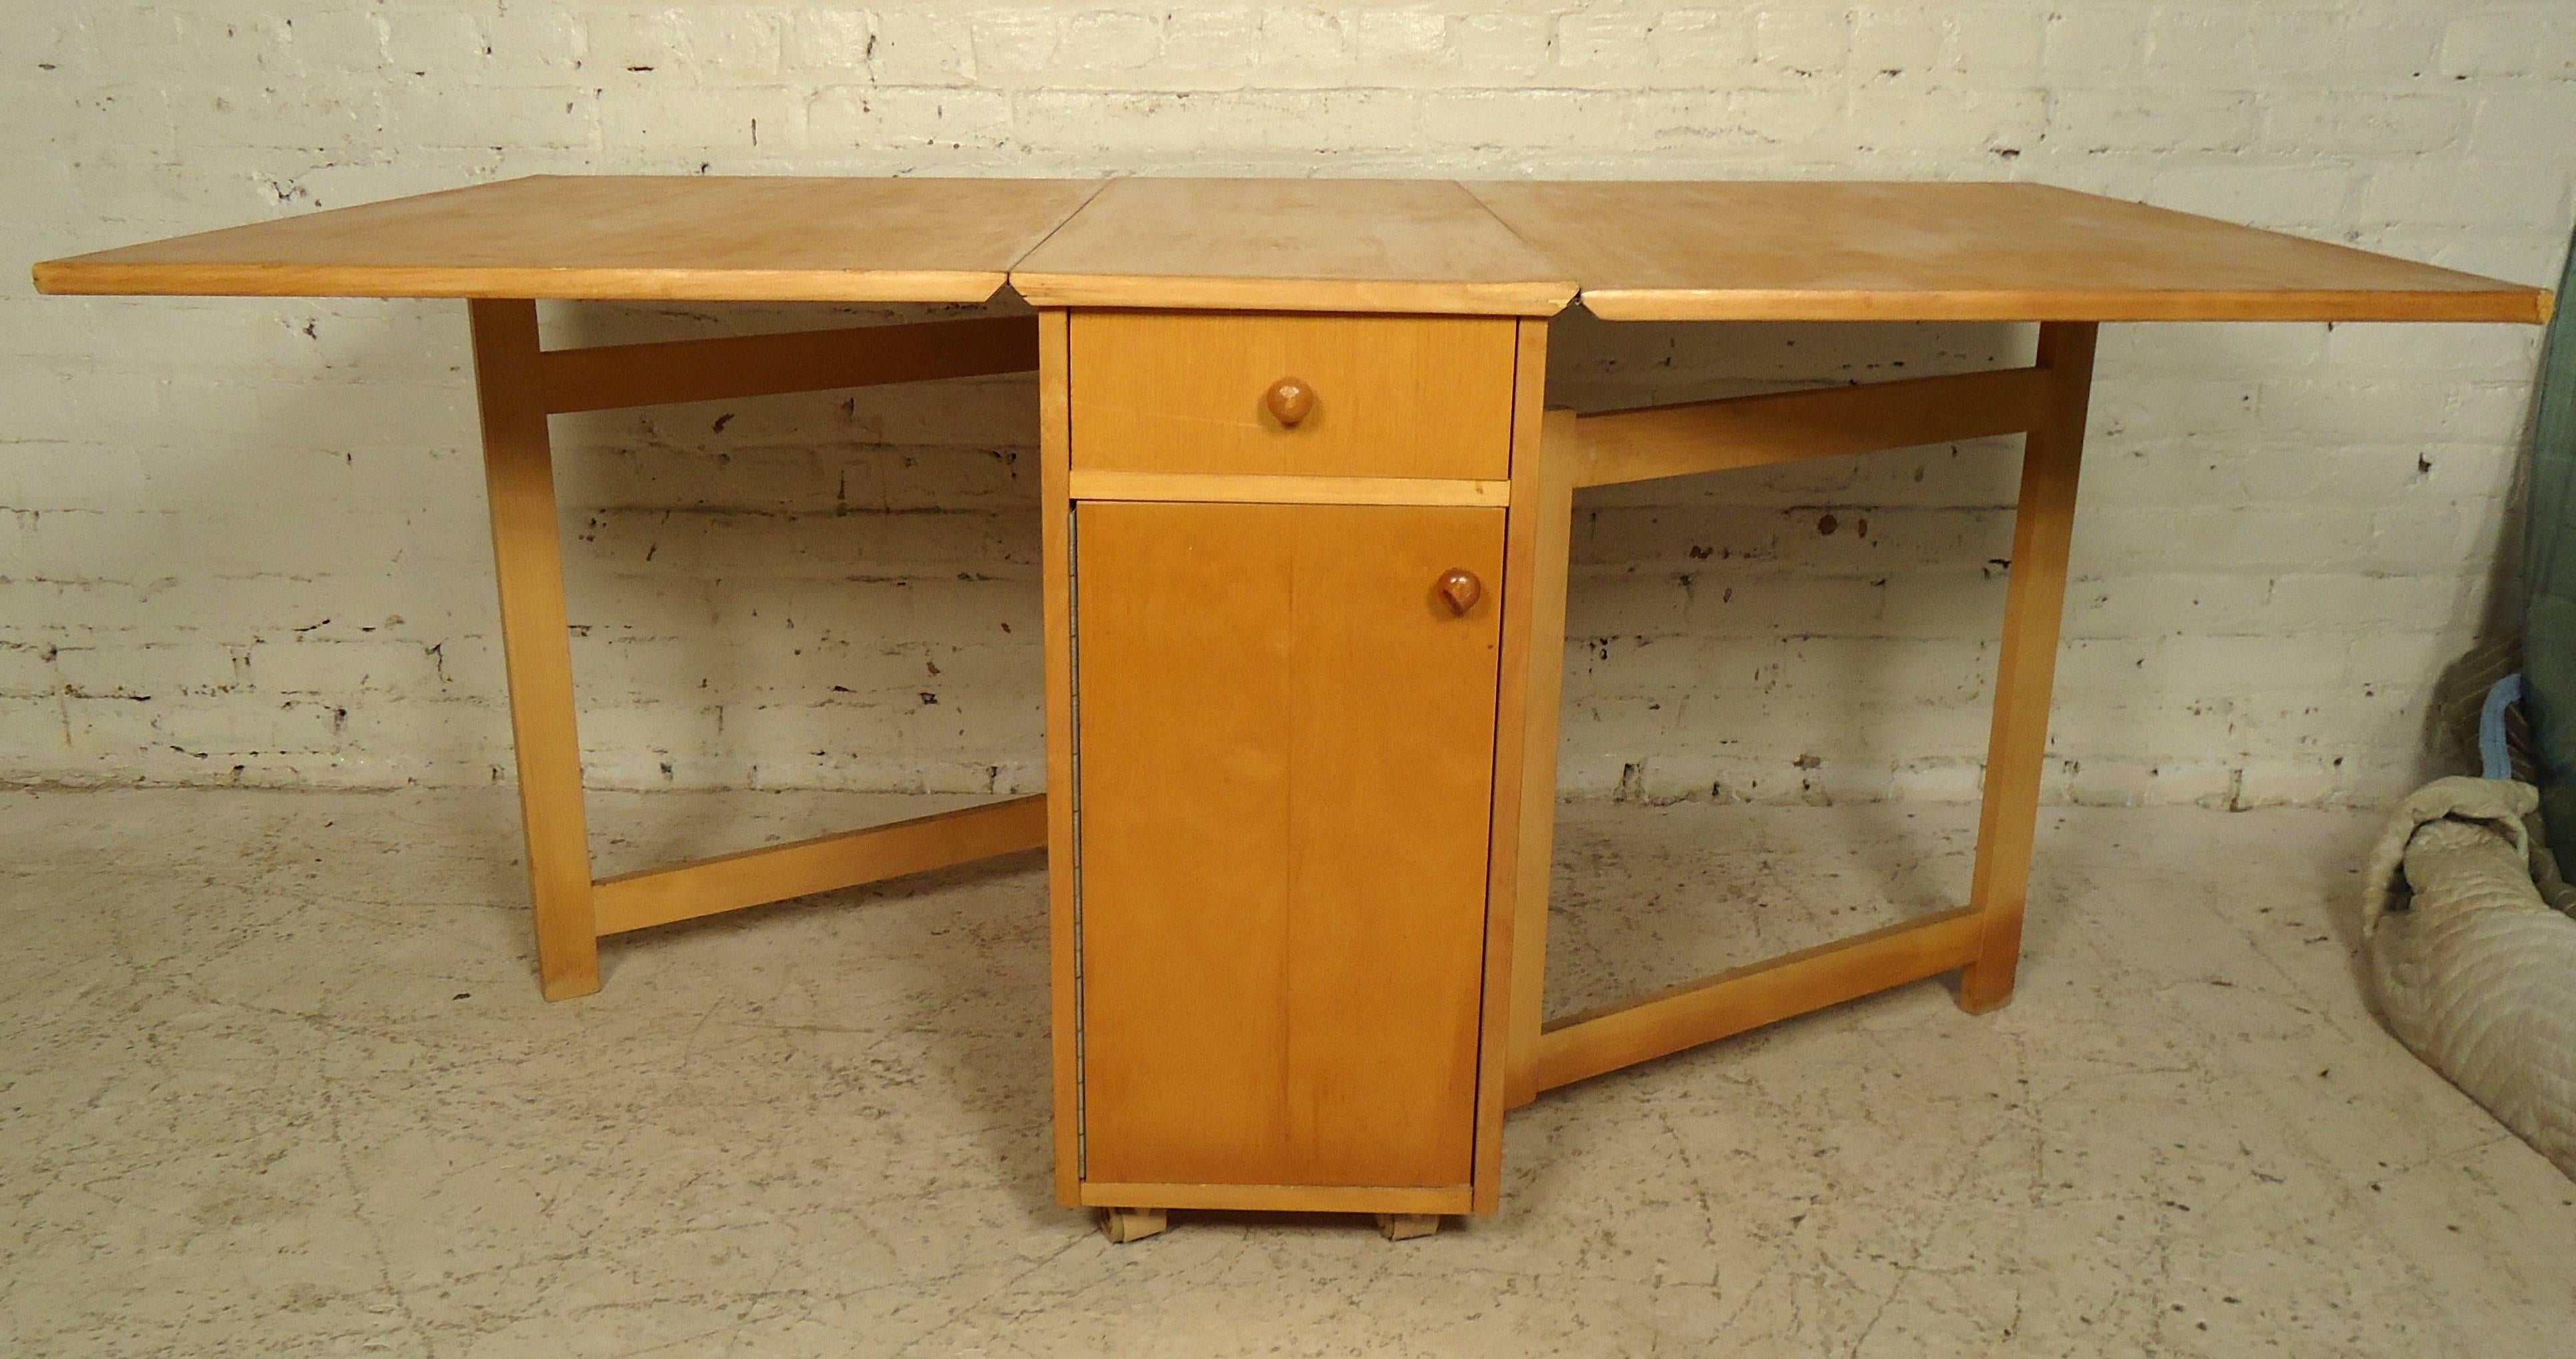 Vintage dining set and four folding chairs. The chairs stow away inside the table perfectly. Table also features one-drawer and is on four wheels that make it easy to maneuver.
Opens to 60" wide.

(Please confirm item location - NY or NJ -